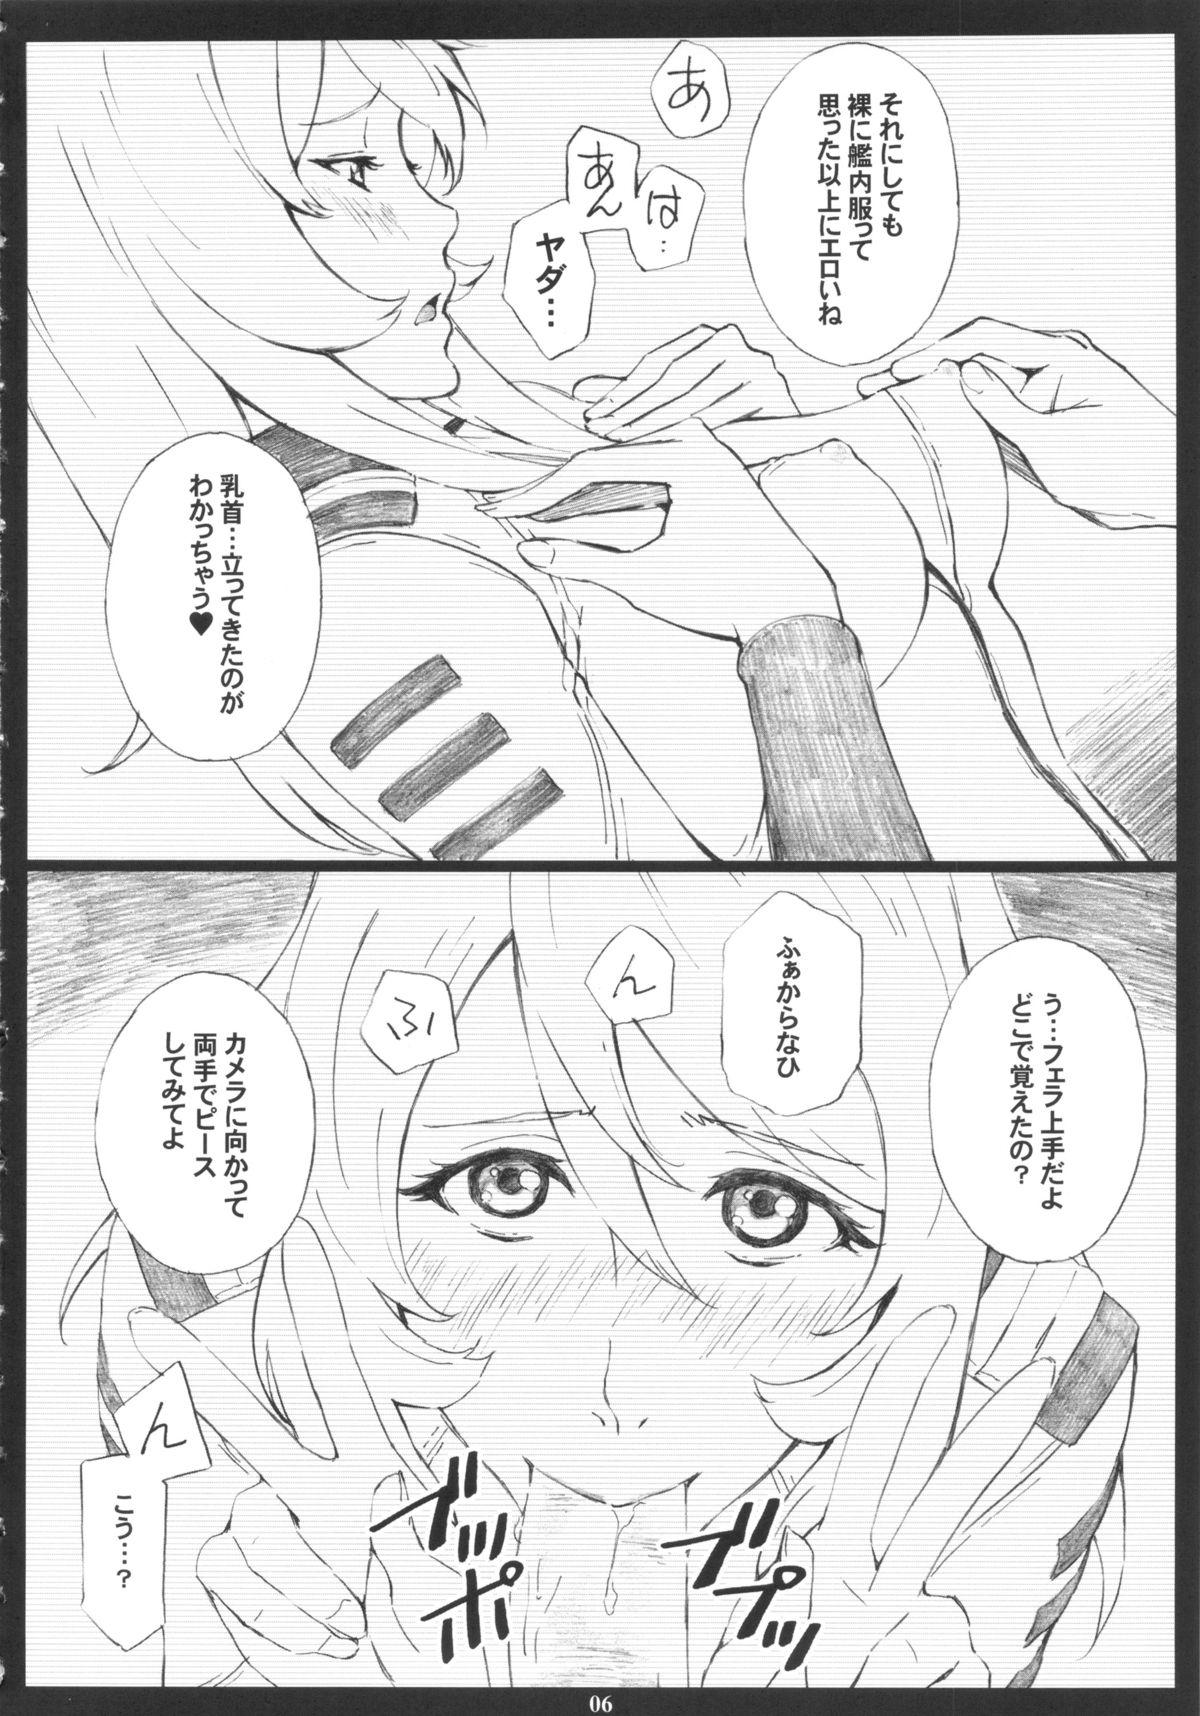 Calle YMT - Space battleship yamato Sesso - Page 5